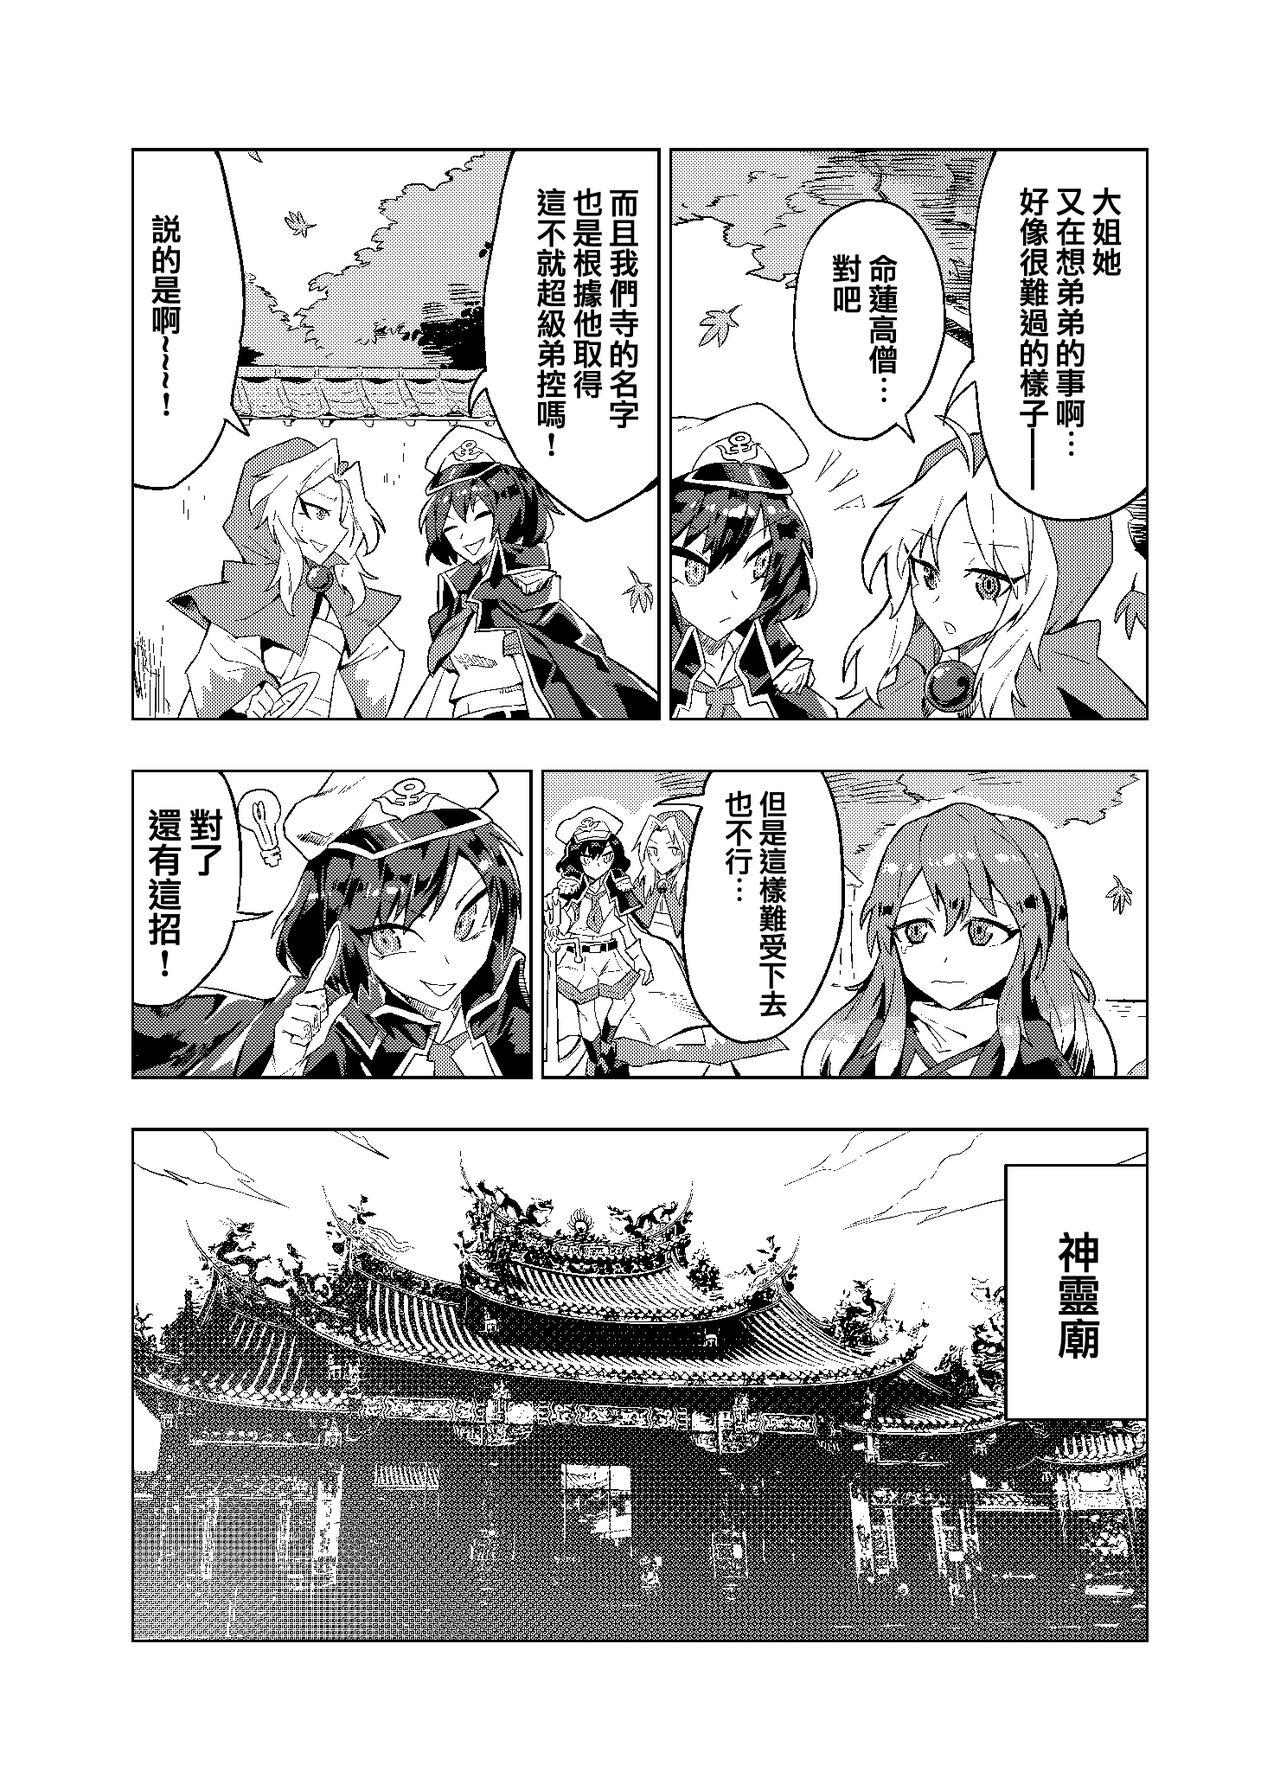 Dorm 弟控圣和换装太子（Touhou Project） - Touhou project Black Hair - Page 4